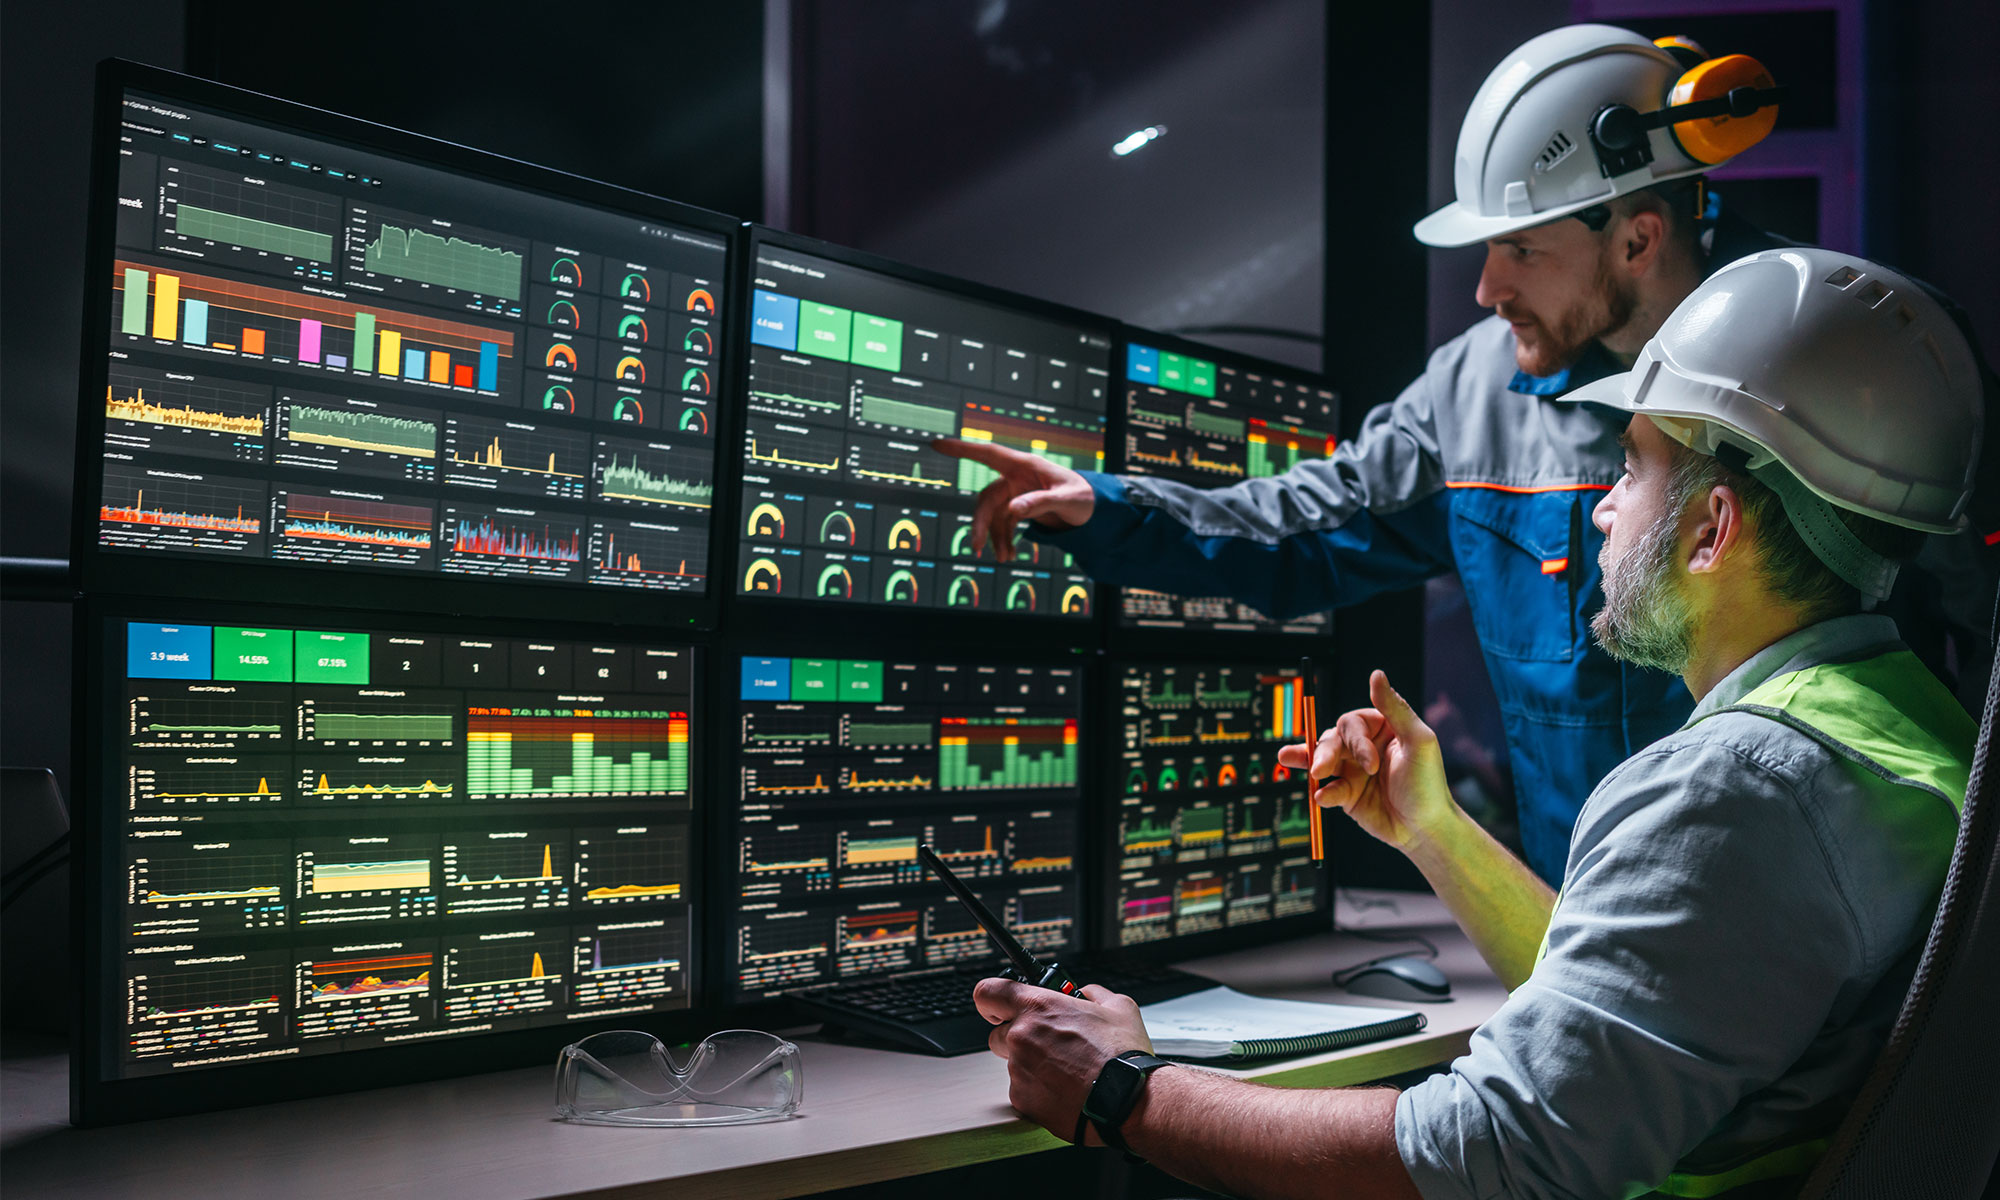 Two facility operators checking and analyzing process on screens